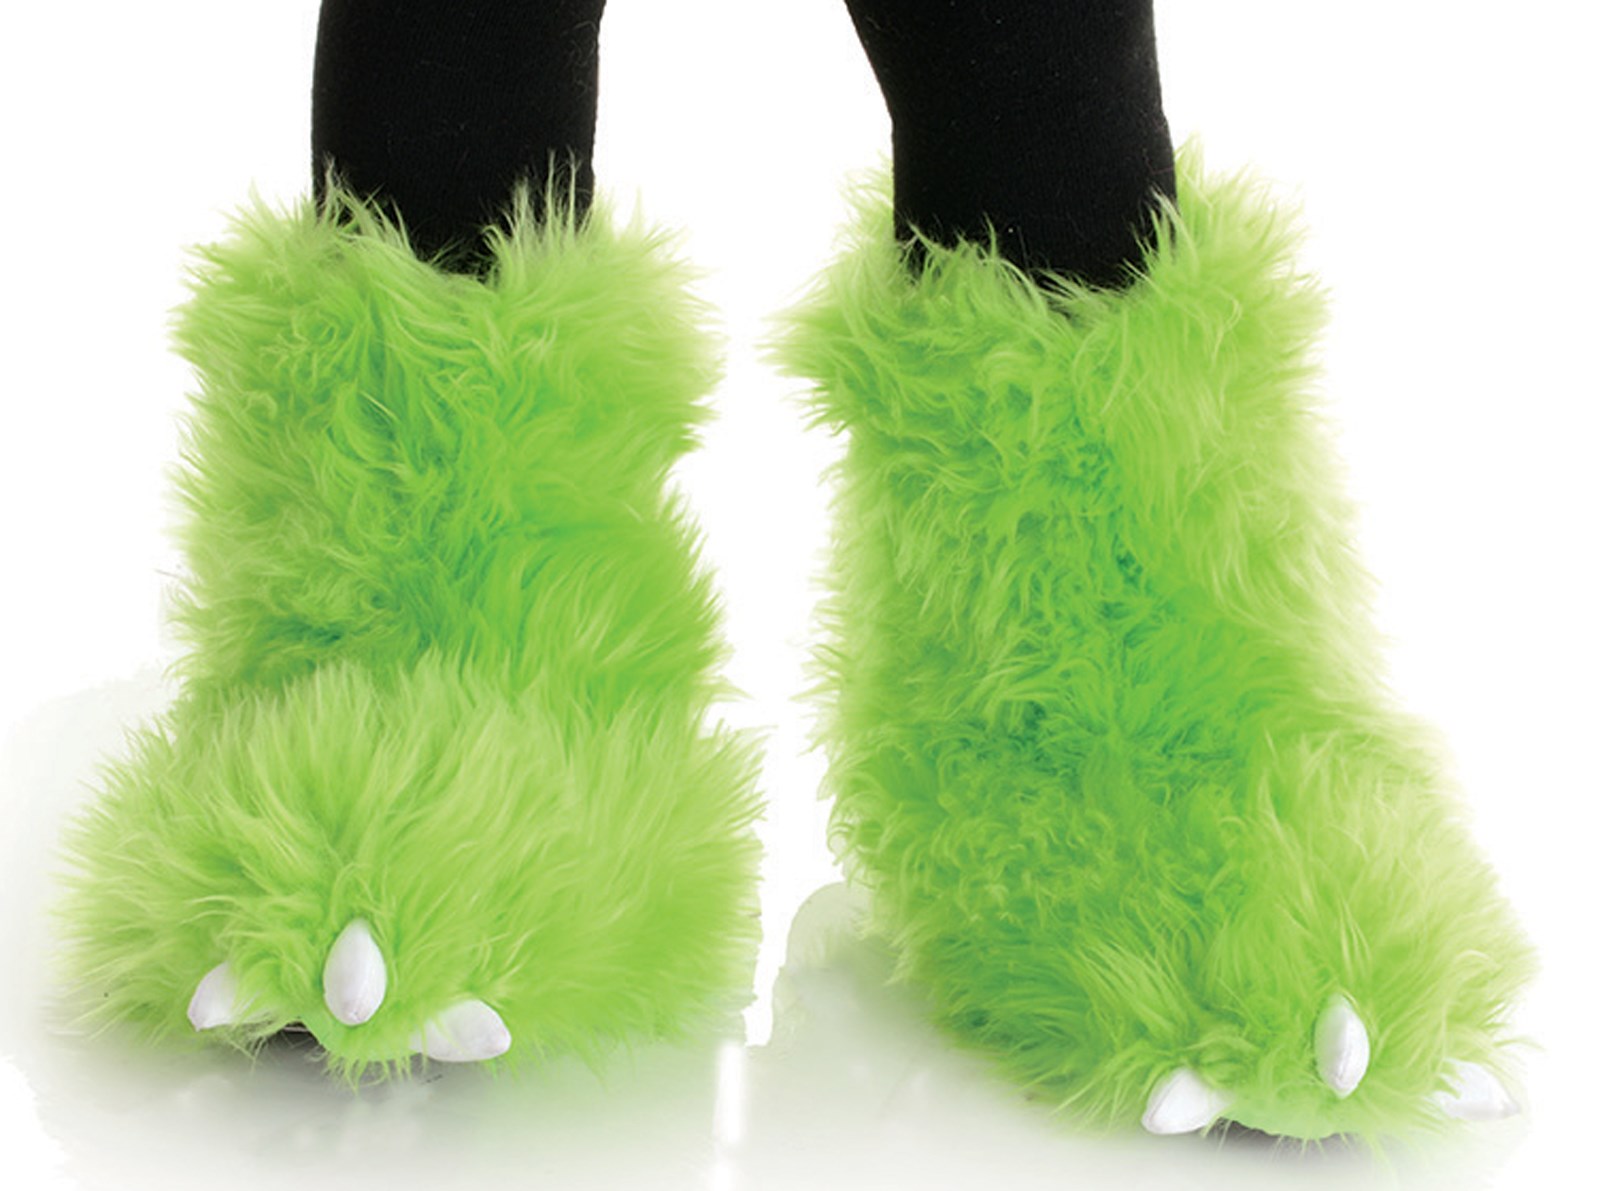 Neon Green Monster Boots For Kids